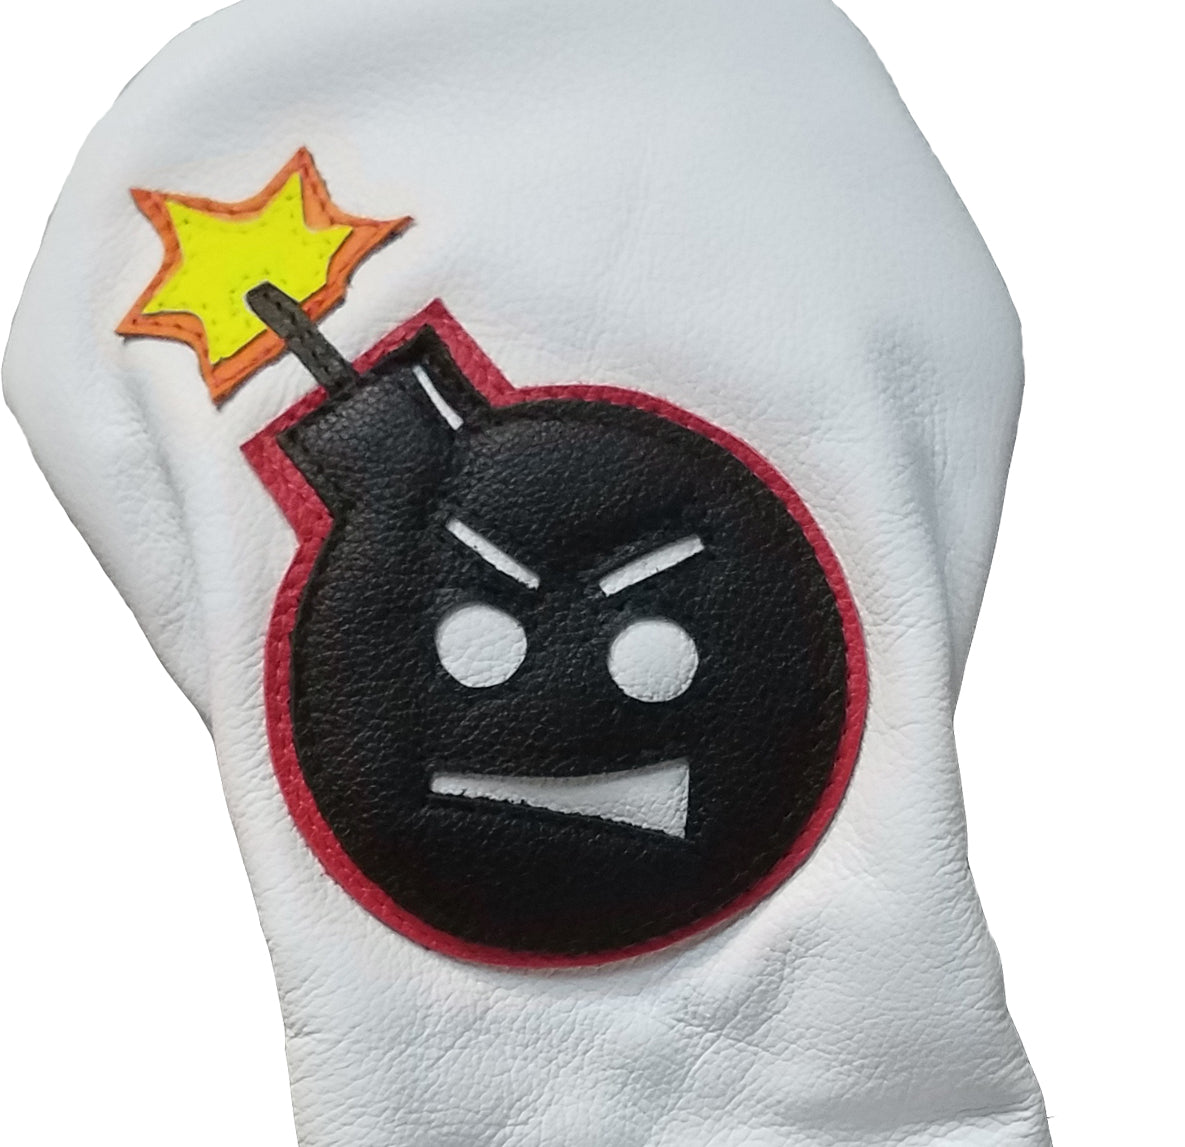 Limited Edition! The "Angry Bomb" Driver Headcover - Robert Mark Golf